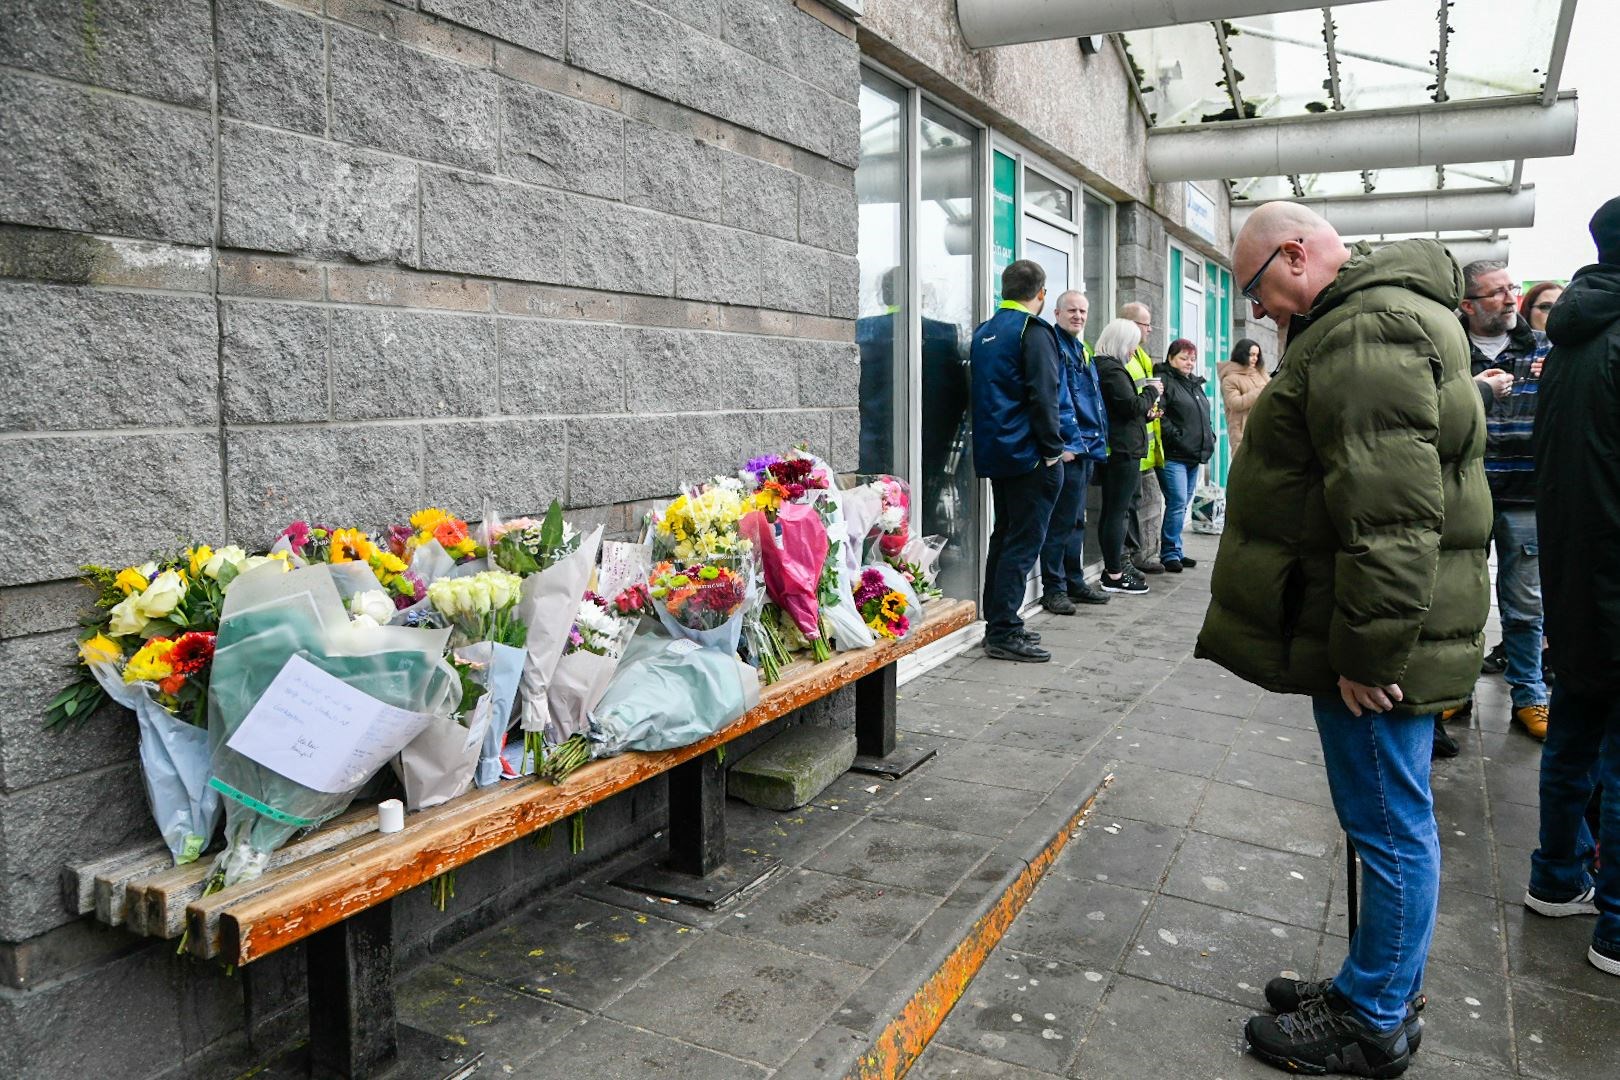 A mourner pays respects to Keith Rollinson at Elgin Bus Station. Picture: Beth Taylor